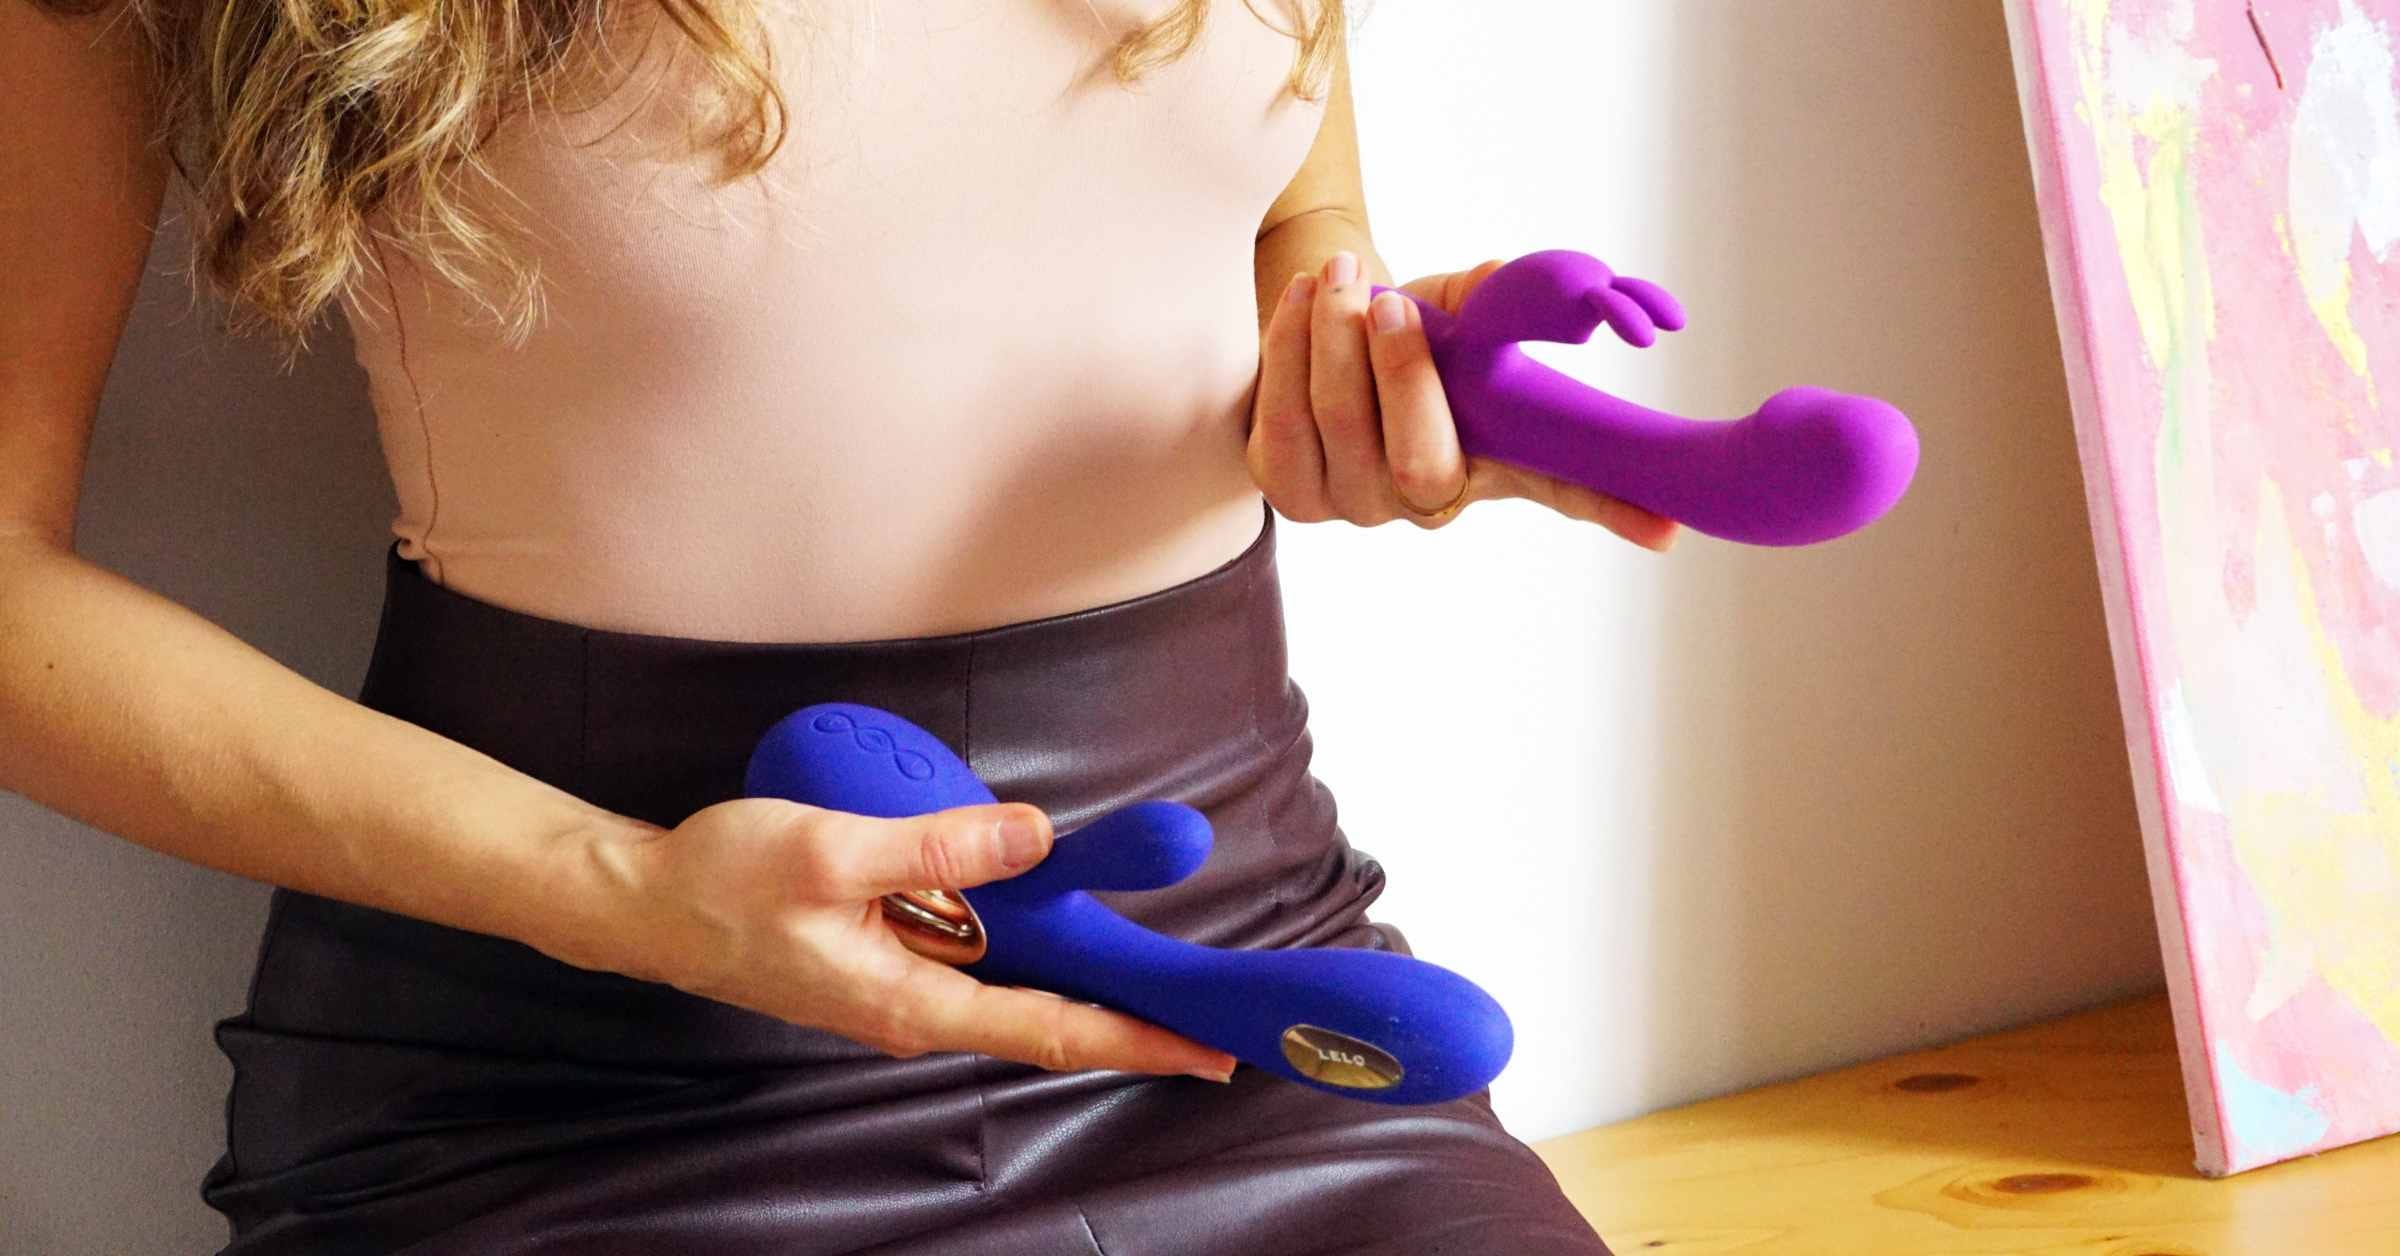 How To Travel With Sex Toys [A Complete Travel Guide]